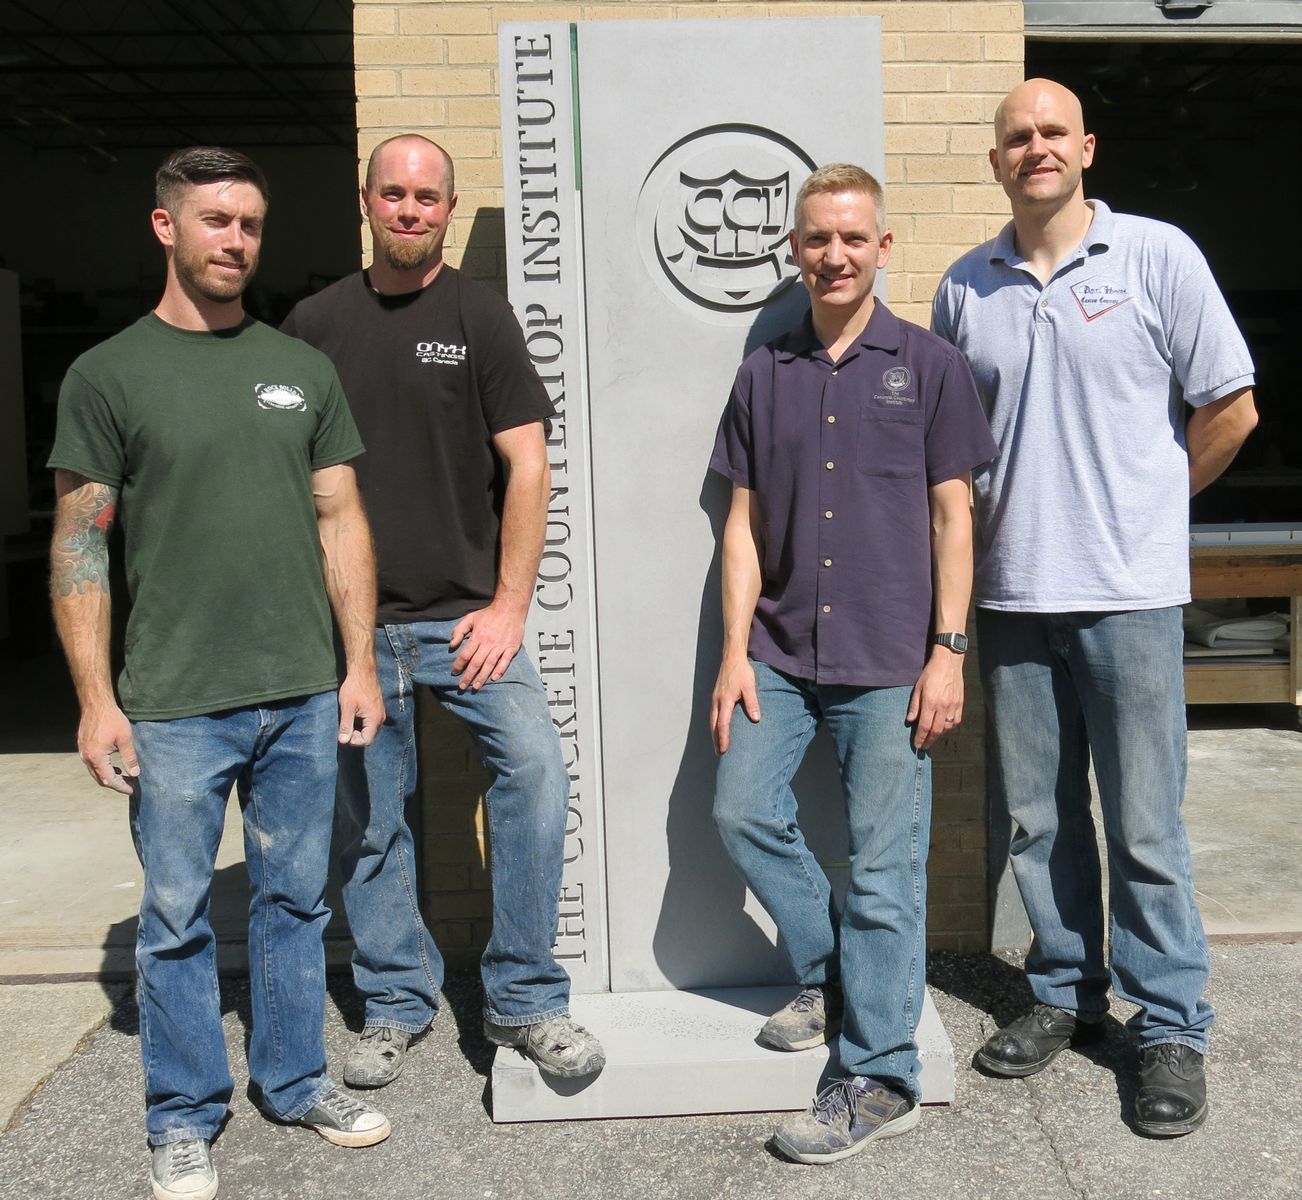 The team was as follows: Nathan Smith of Rock Solid Concrete Artisans in Huntersville, North Carolina, Rob Martins of Onyx Castings in Okanagan, British Columbia, and Carl Zunker of Arthouse Custom Concrete in Miamisburg, Ohio. 